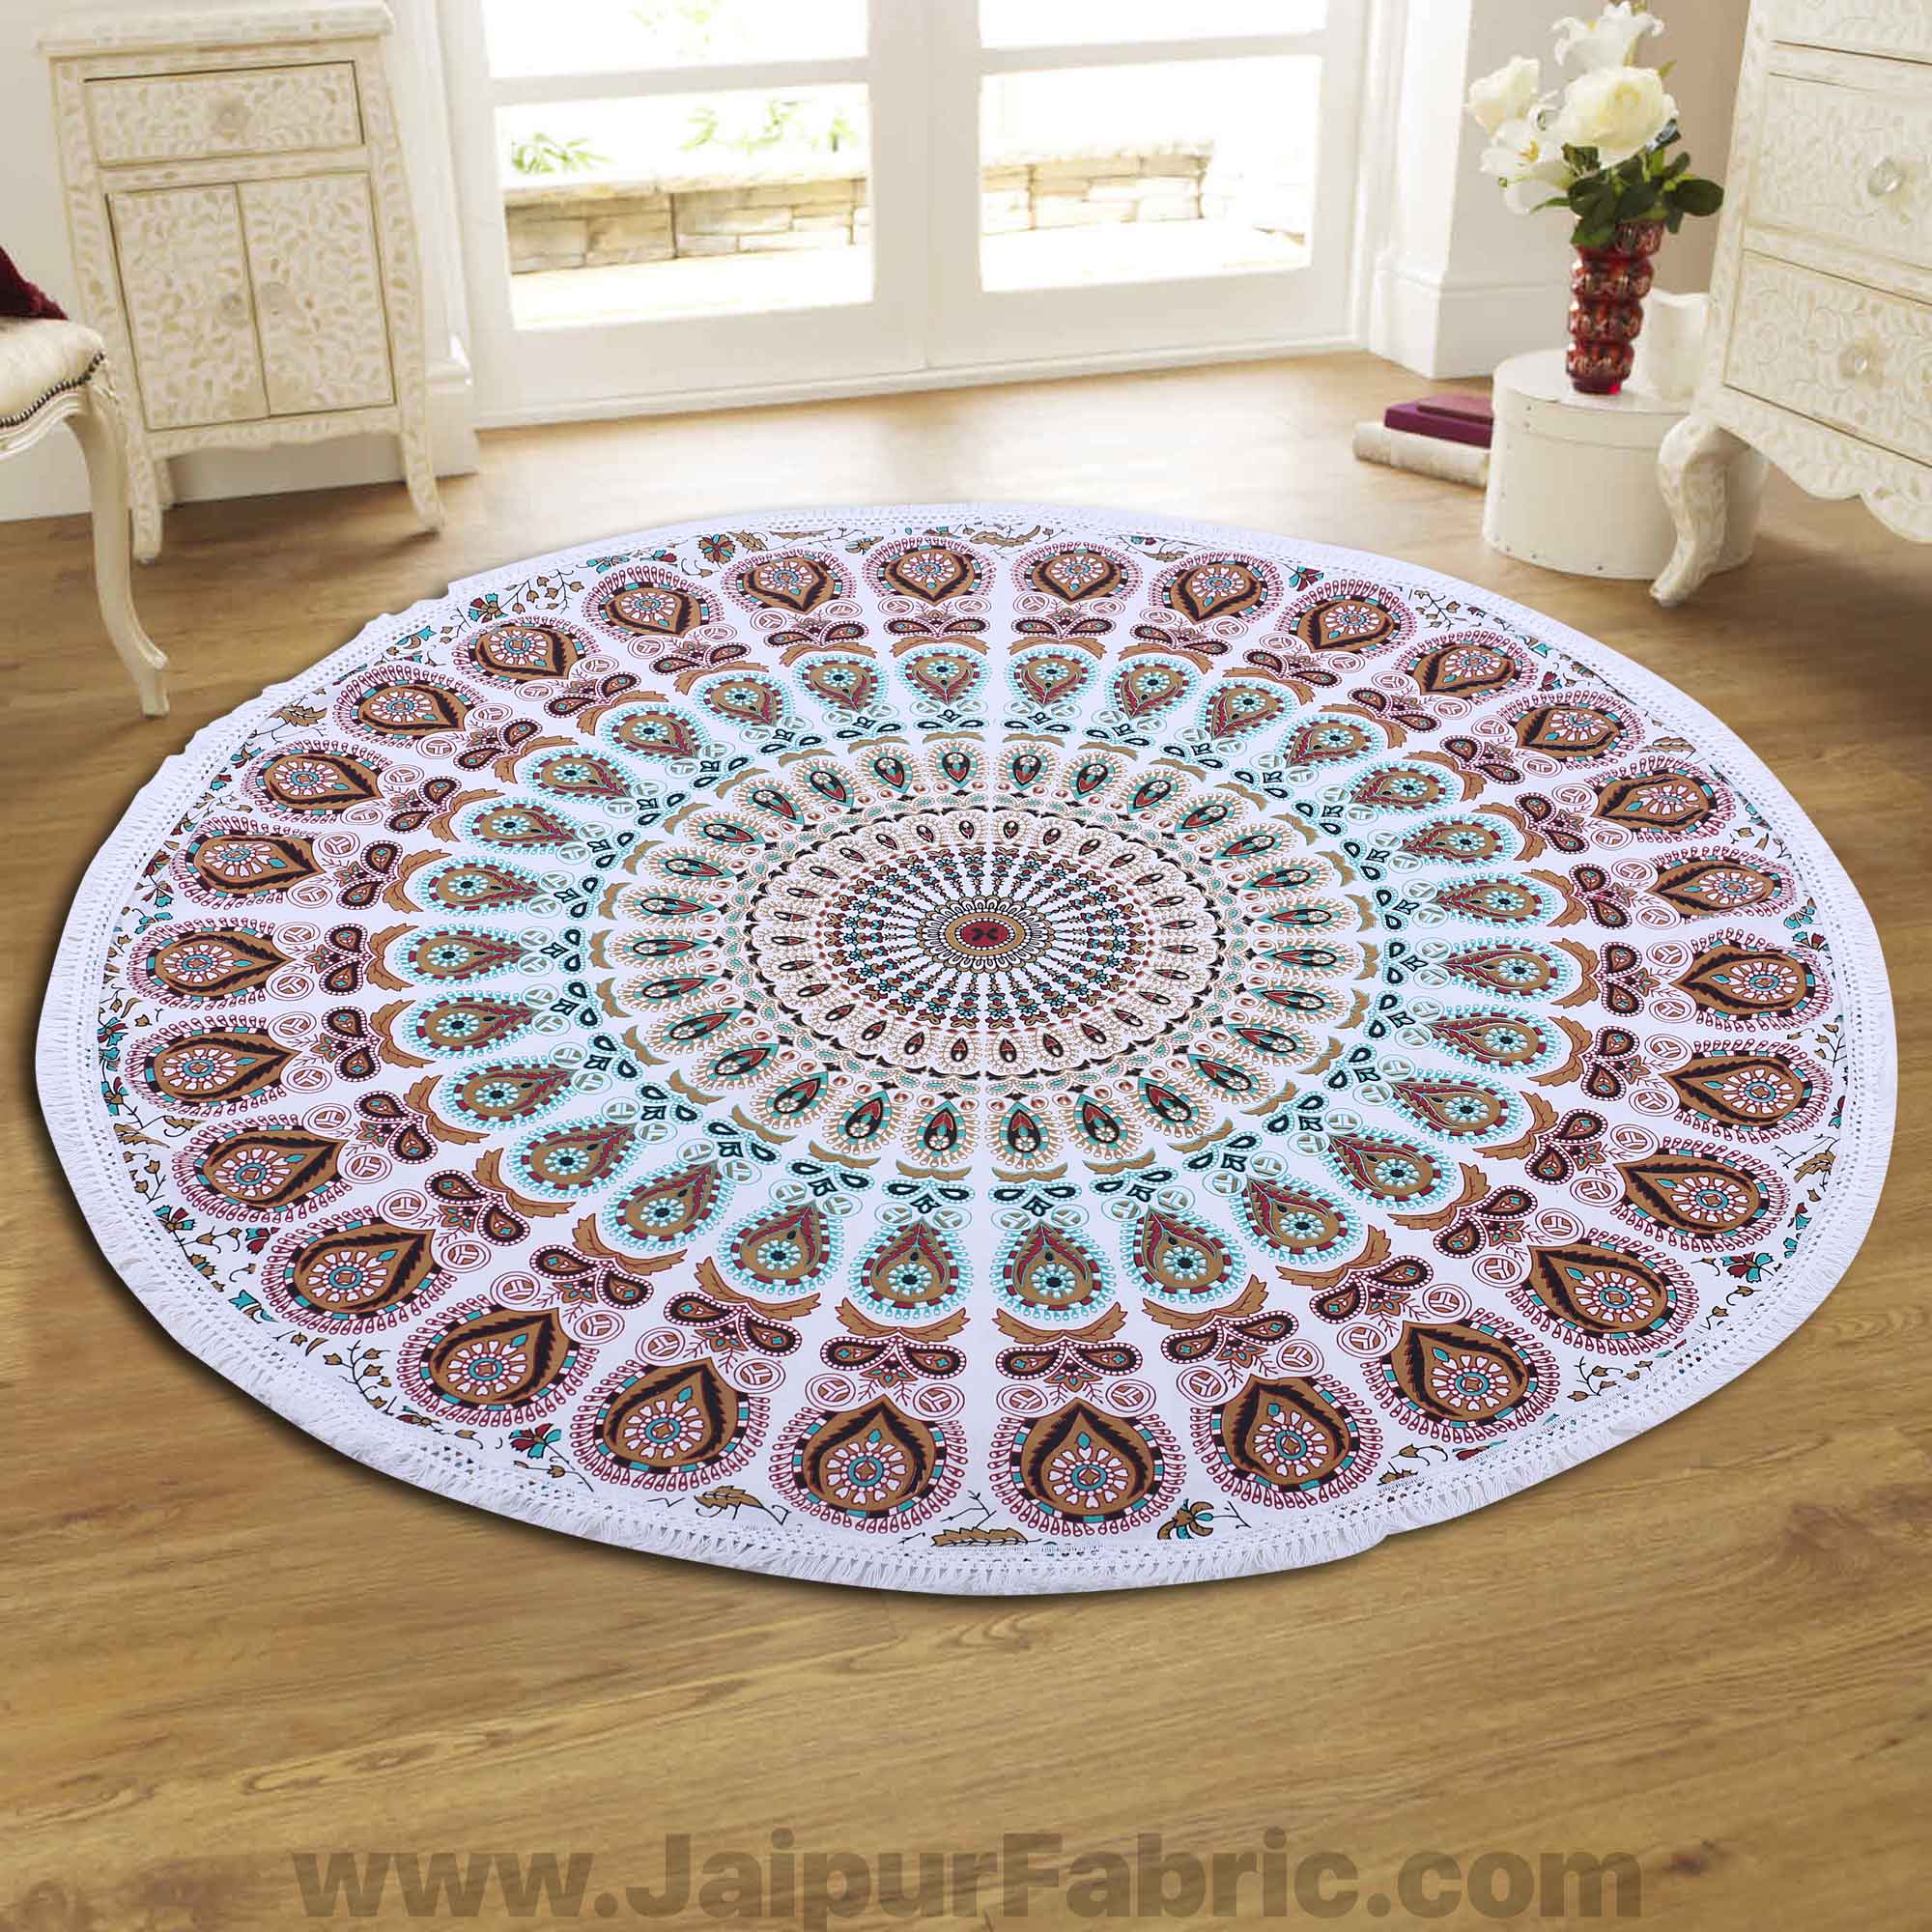 Red  Mandala Printed Wall Hanging Round Roundies Beach Throw Cotton Yoga Mat Table Cloths Table Cover Picnic Mat Tapestry Picnic Blanket Mat 72